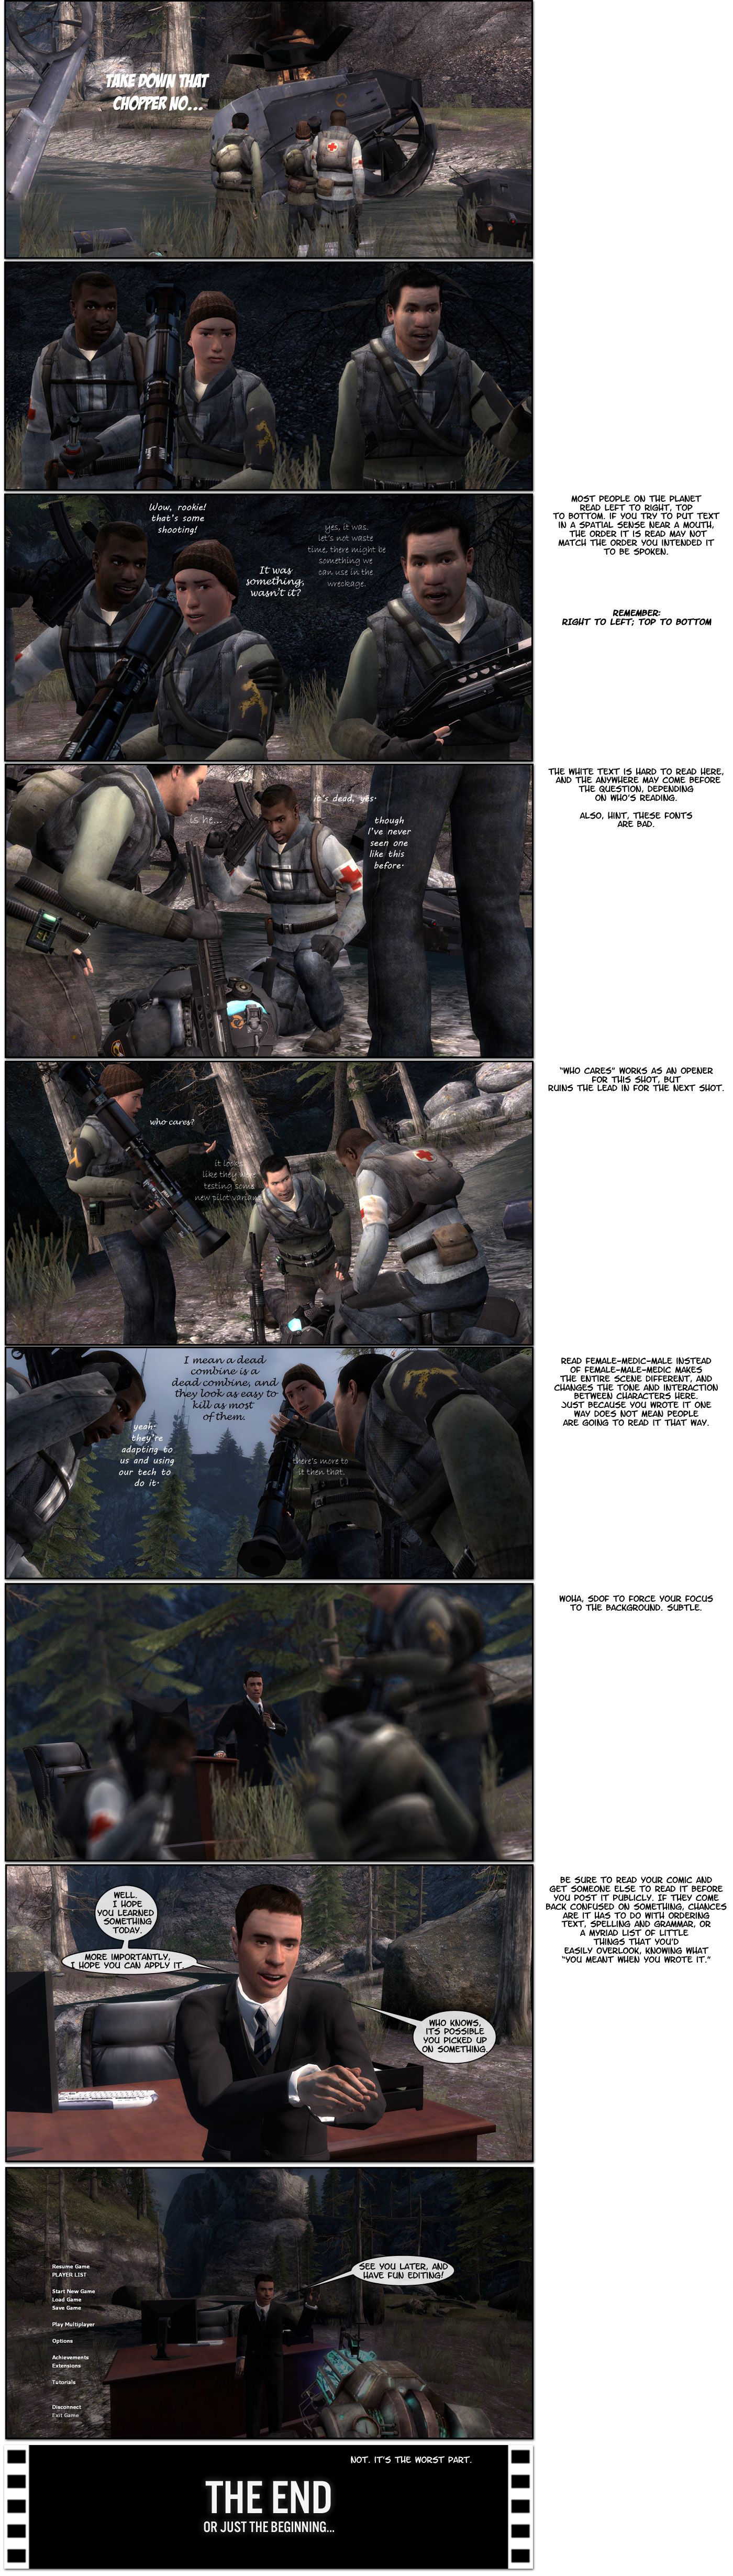 The exact same scene as before is played out again, but with different fonts, no speech bubbles and different ordering. Messages to the side note that most people on the planet read left to right, top to bottom, so if you try to put text in a spatial sense near a mouth, the order it is read may not match the order you intend it to be spoken. White text directly on the background is also hard to read and the reply may come before the question depending on who’s reading. The message also notes the fonts used are bad. Who cares works as an opener for the shot after the change in order, but ruins the lead in for the next shot. It also suggests reading female-medic-male instead of female-male-medic, noting that it makes the entire scene different and changes the tone and interaction between characters here, pointing out just because you wrote it one way does not mean people are going to read it that way. To conclude, it sarcastically notes that super depth of field to force your focus to the background is subtle, as everyone but Lt_Commander is blurred on the final shot. Lt_C then says he hopes you learned something today and, more importantly, he hopes you can apply it. He adds who knows, it’s possible you picked up on something. A final note recommends reading your comic and getting someone else to read it before you post it publicly and, if they come back confused on something, chances are it has to do with ordering text, spelling and grammar, or a myriad list of little things that you’d easily overlook, knowing what you meant when you wrote it. Lt_C says see you later and have fun editing, then adds not, it’s the worst part. The end.